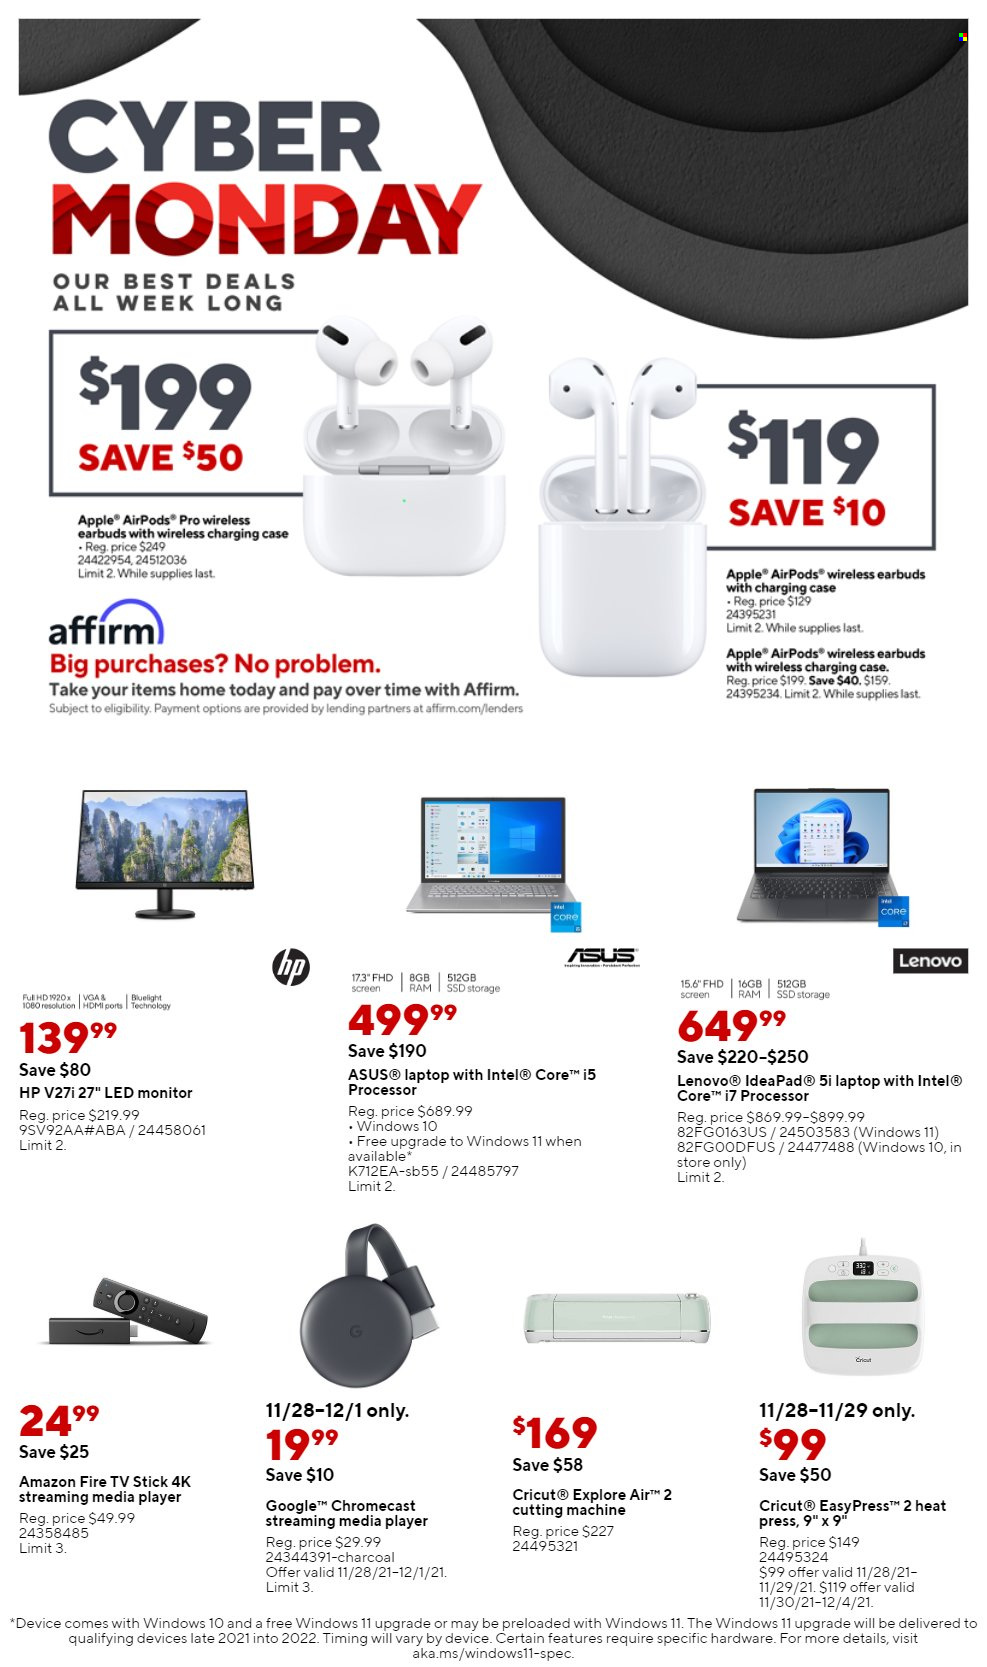 thumbnail - Staples Flyer - 11/28/2021 - 12/04/2021 - Sales products - Intel, Apple, Asus, Lenovo, Hewlett Packard, Amazon Fire, laptop, monitor, Airpods, earbuds, Apple AirPods Pro, streaming media player, Google Chromecast, Fire TV Stick. Page 1.